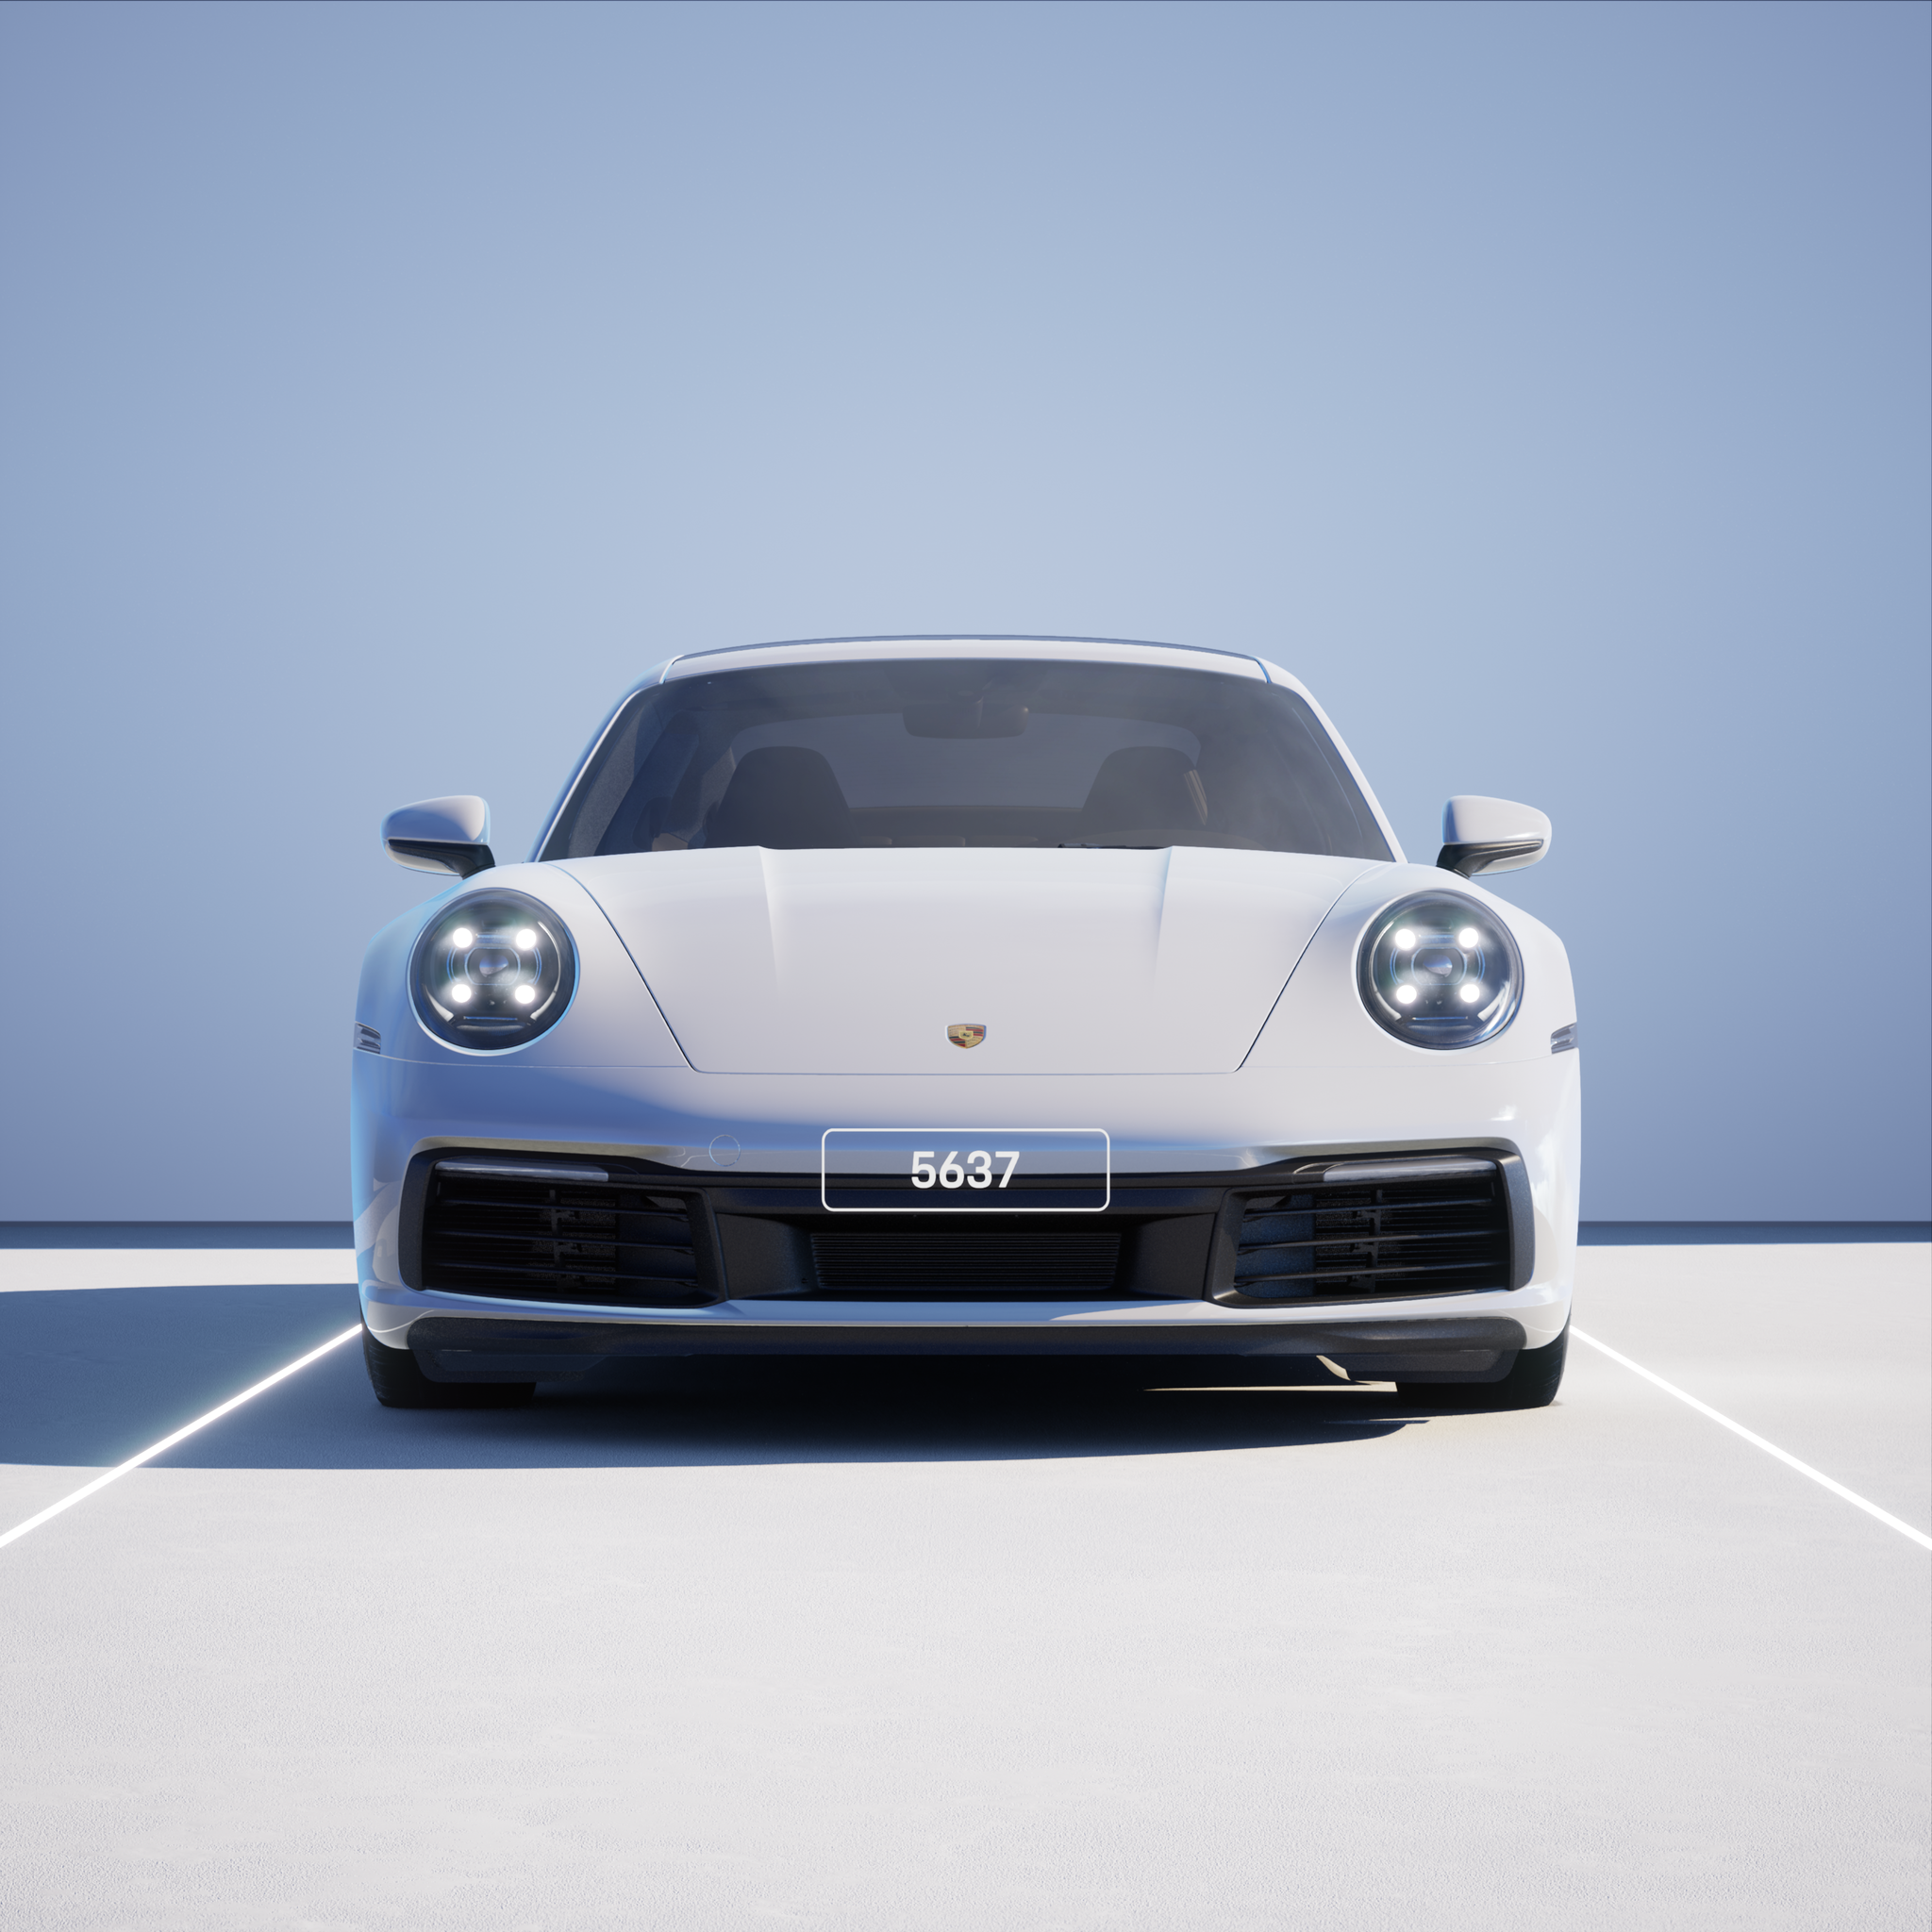 The PORSCHΞ 911 5637 image in phase